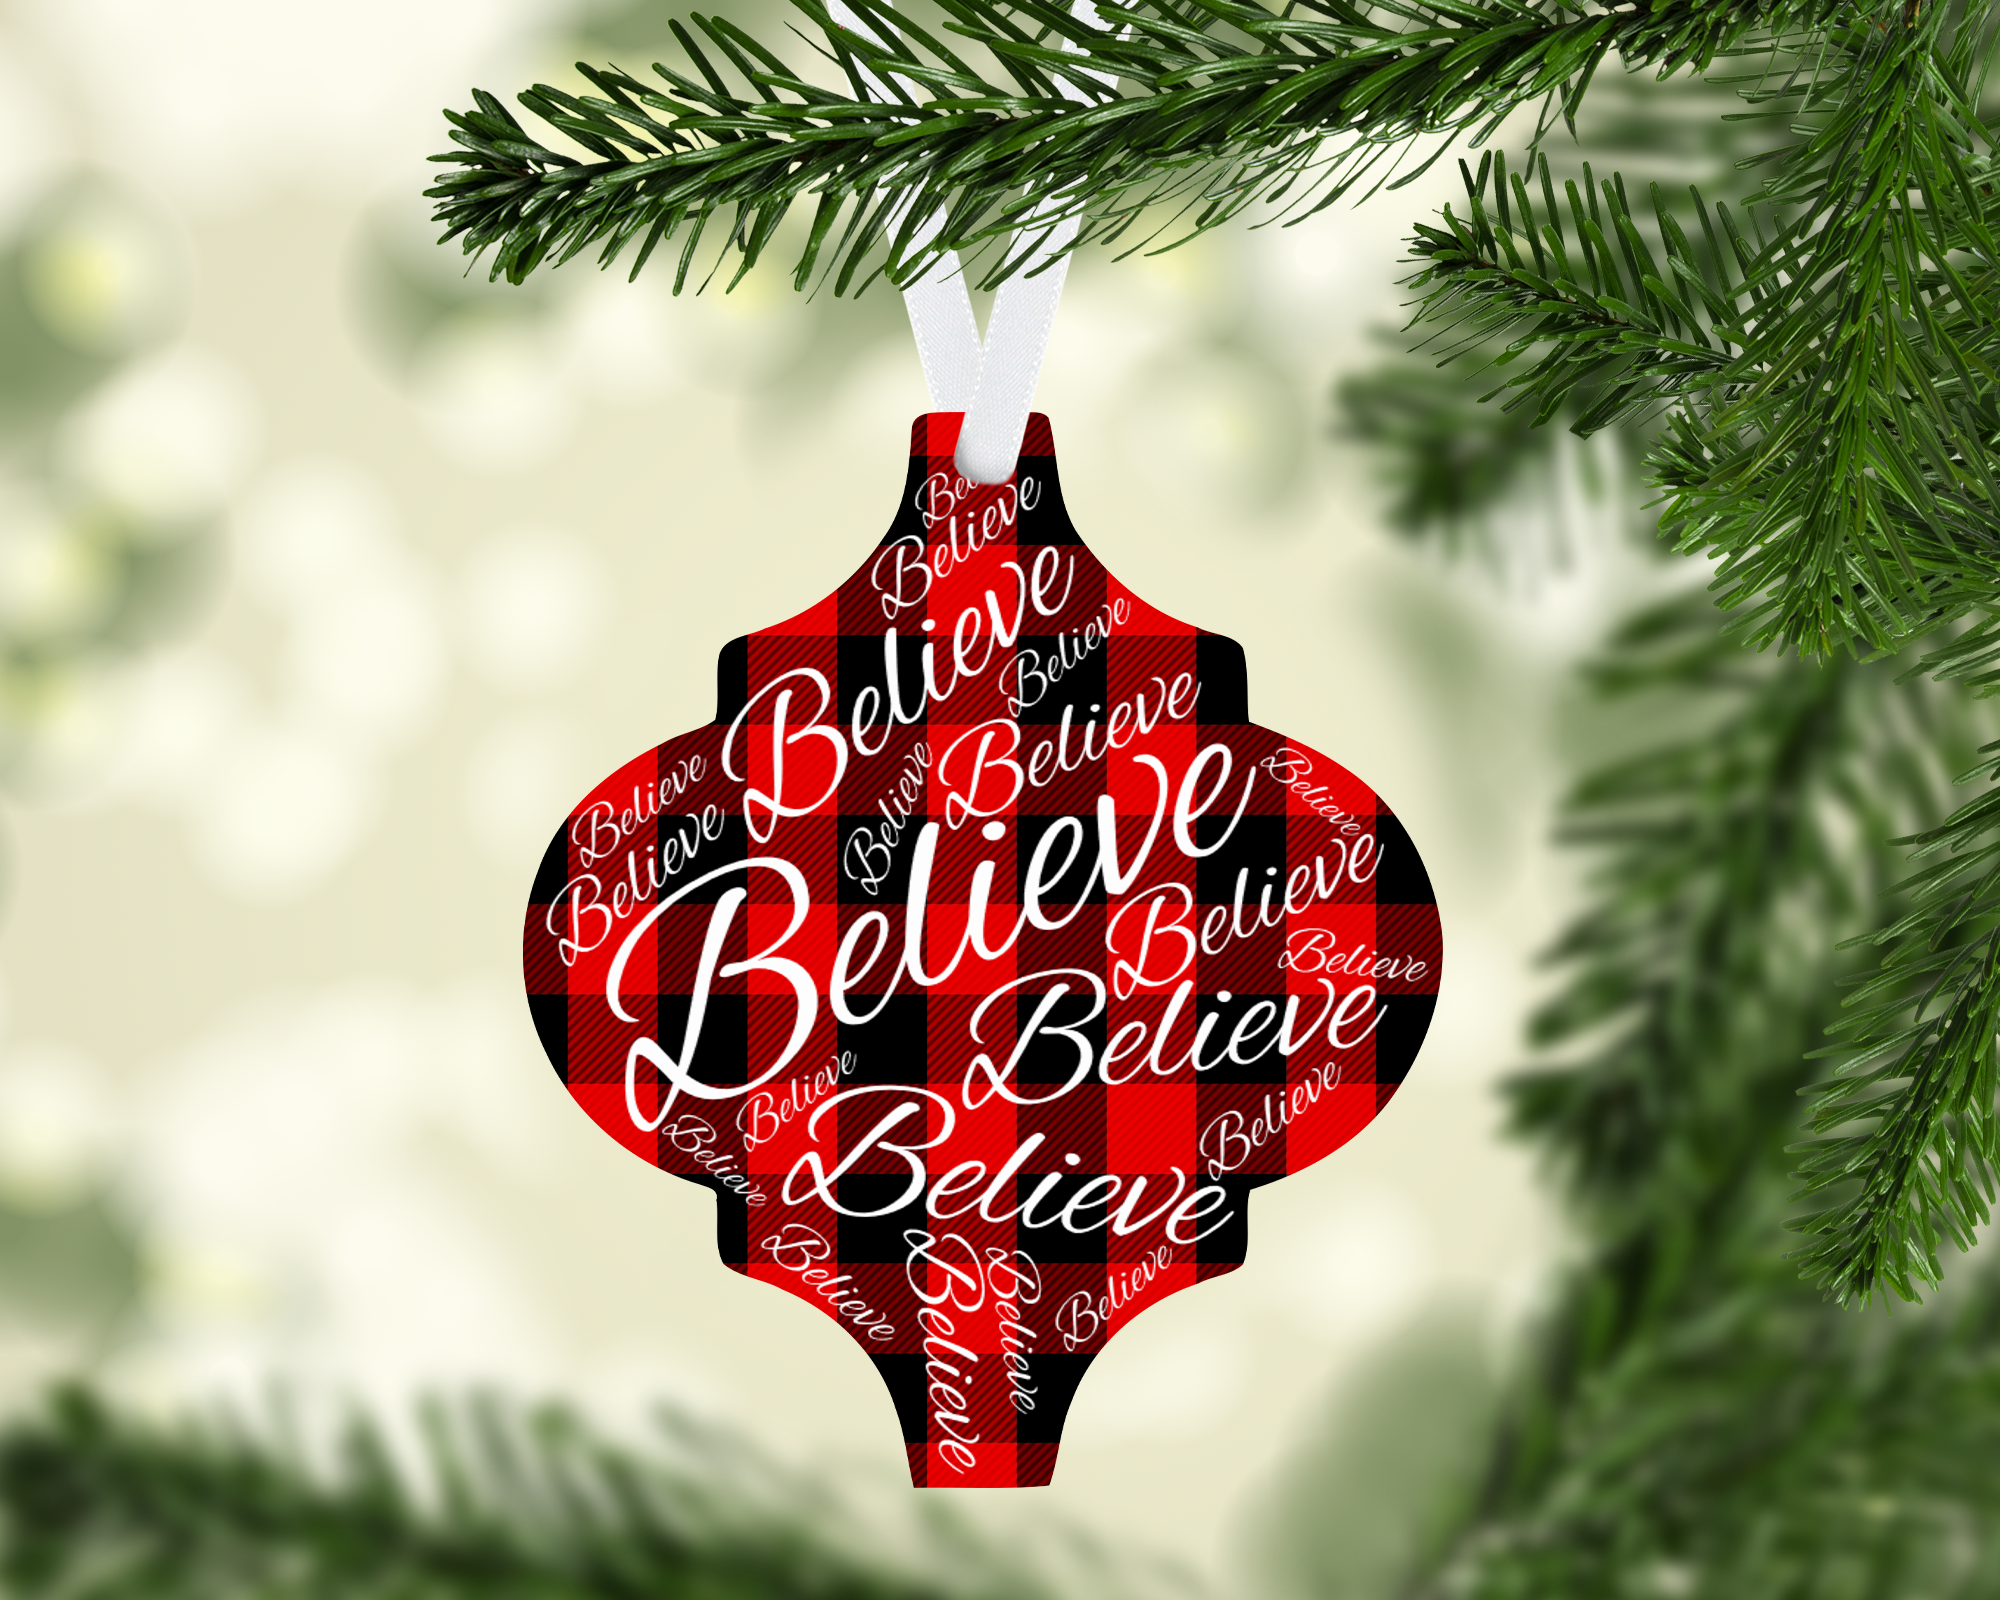 (Instant Print) Digital Download - Believe Arabesque  design - Made for our malin blanks